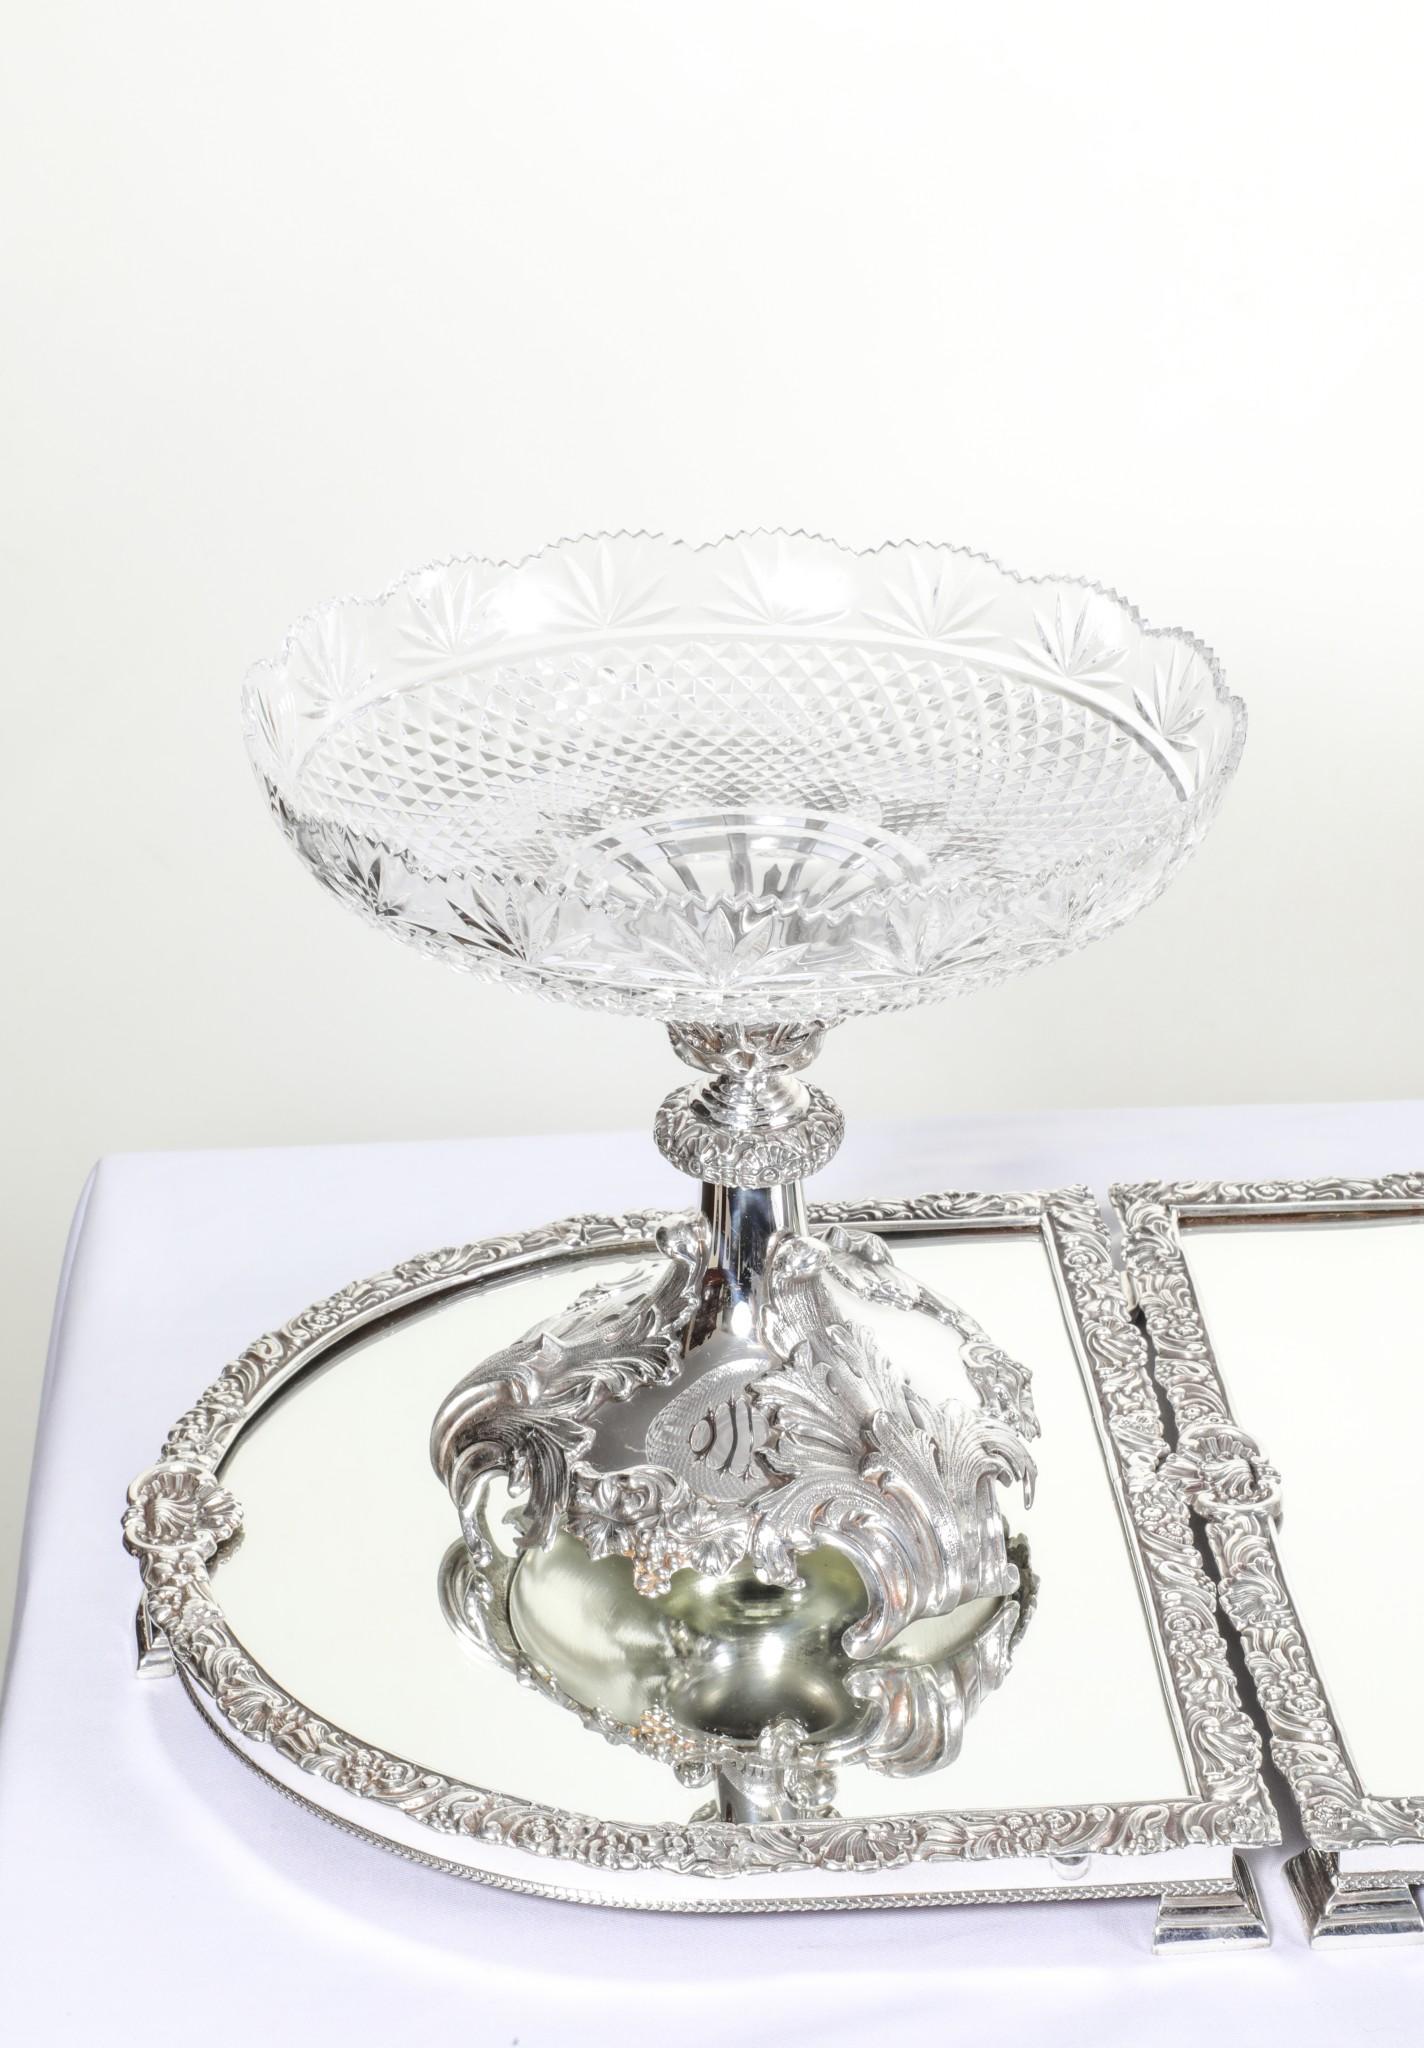 Late 20th Century Rococo Silver Plate Centrepiece Surtout De Table Epergne Dish For Sale